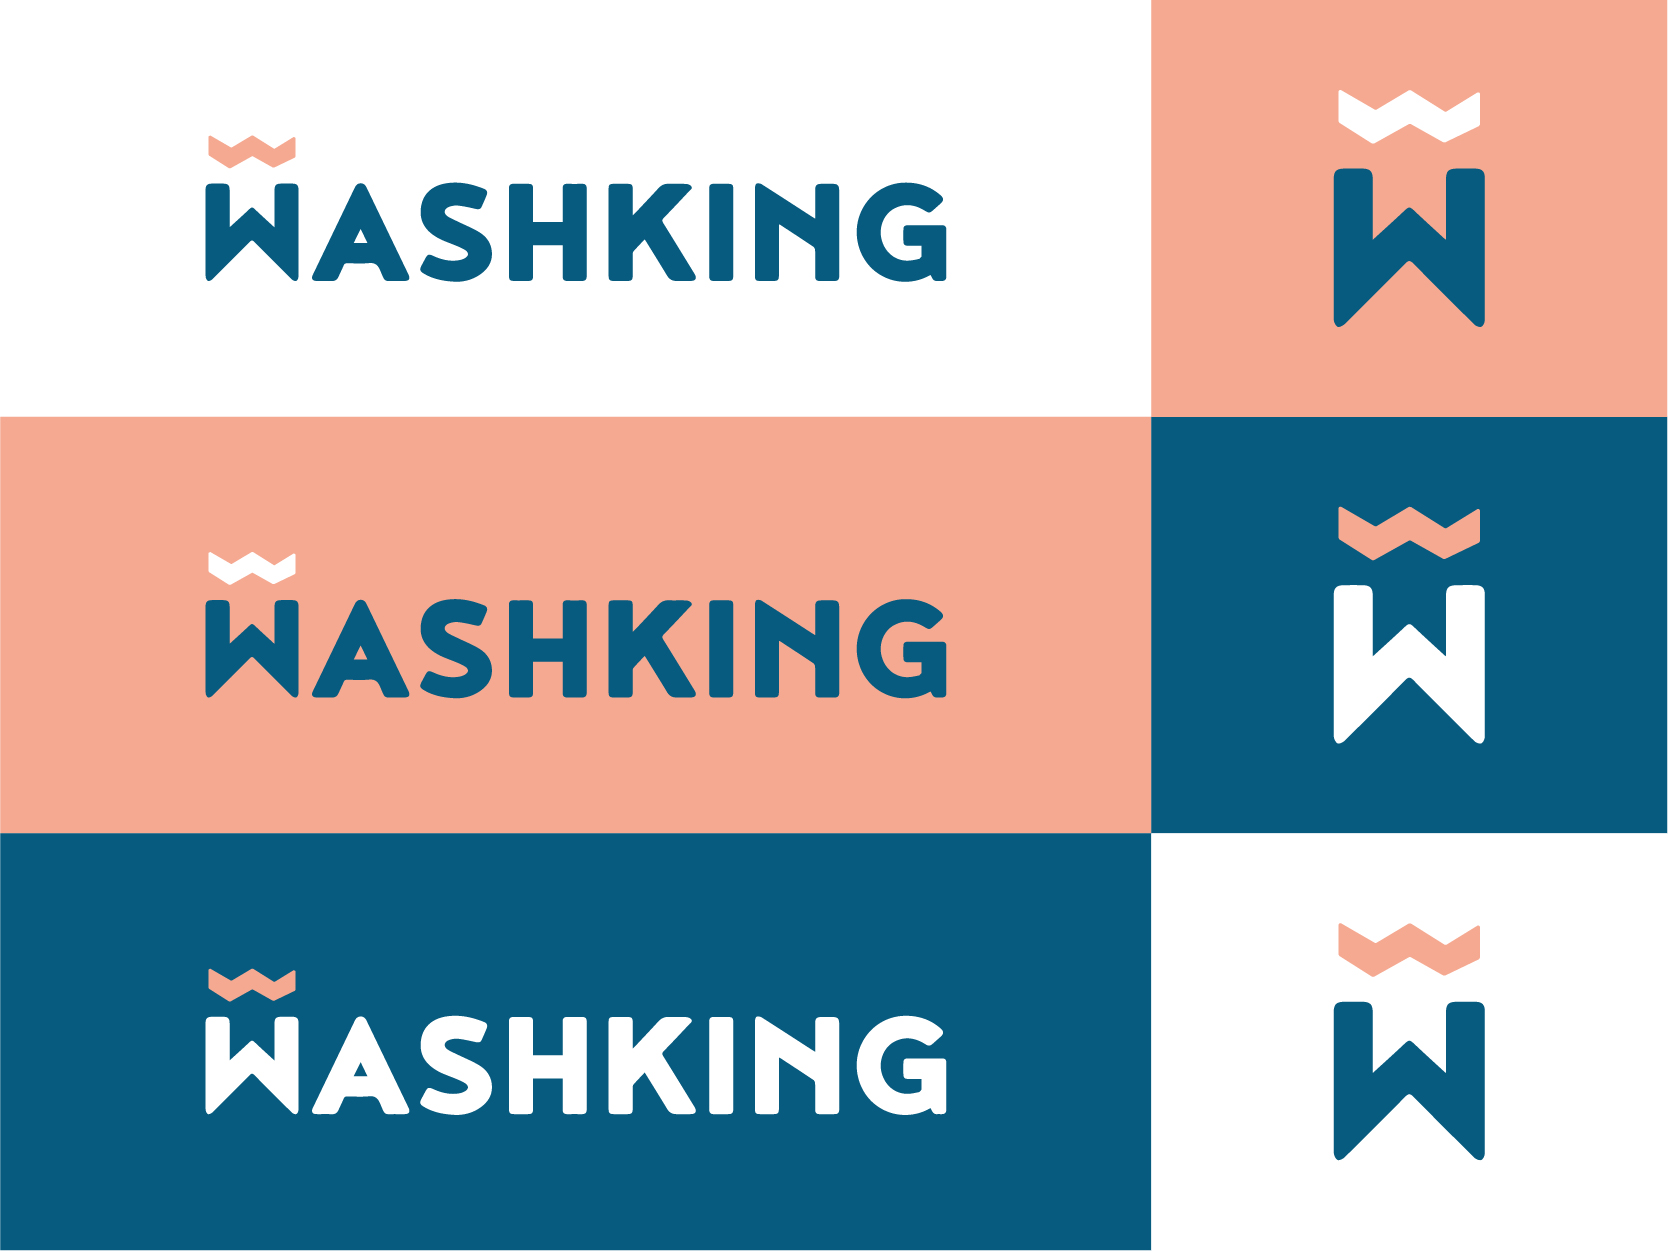 WASHking: Own your Throne!